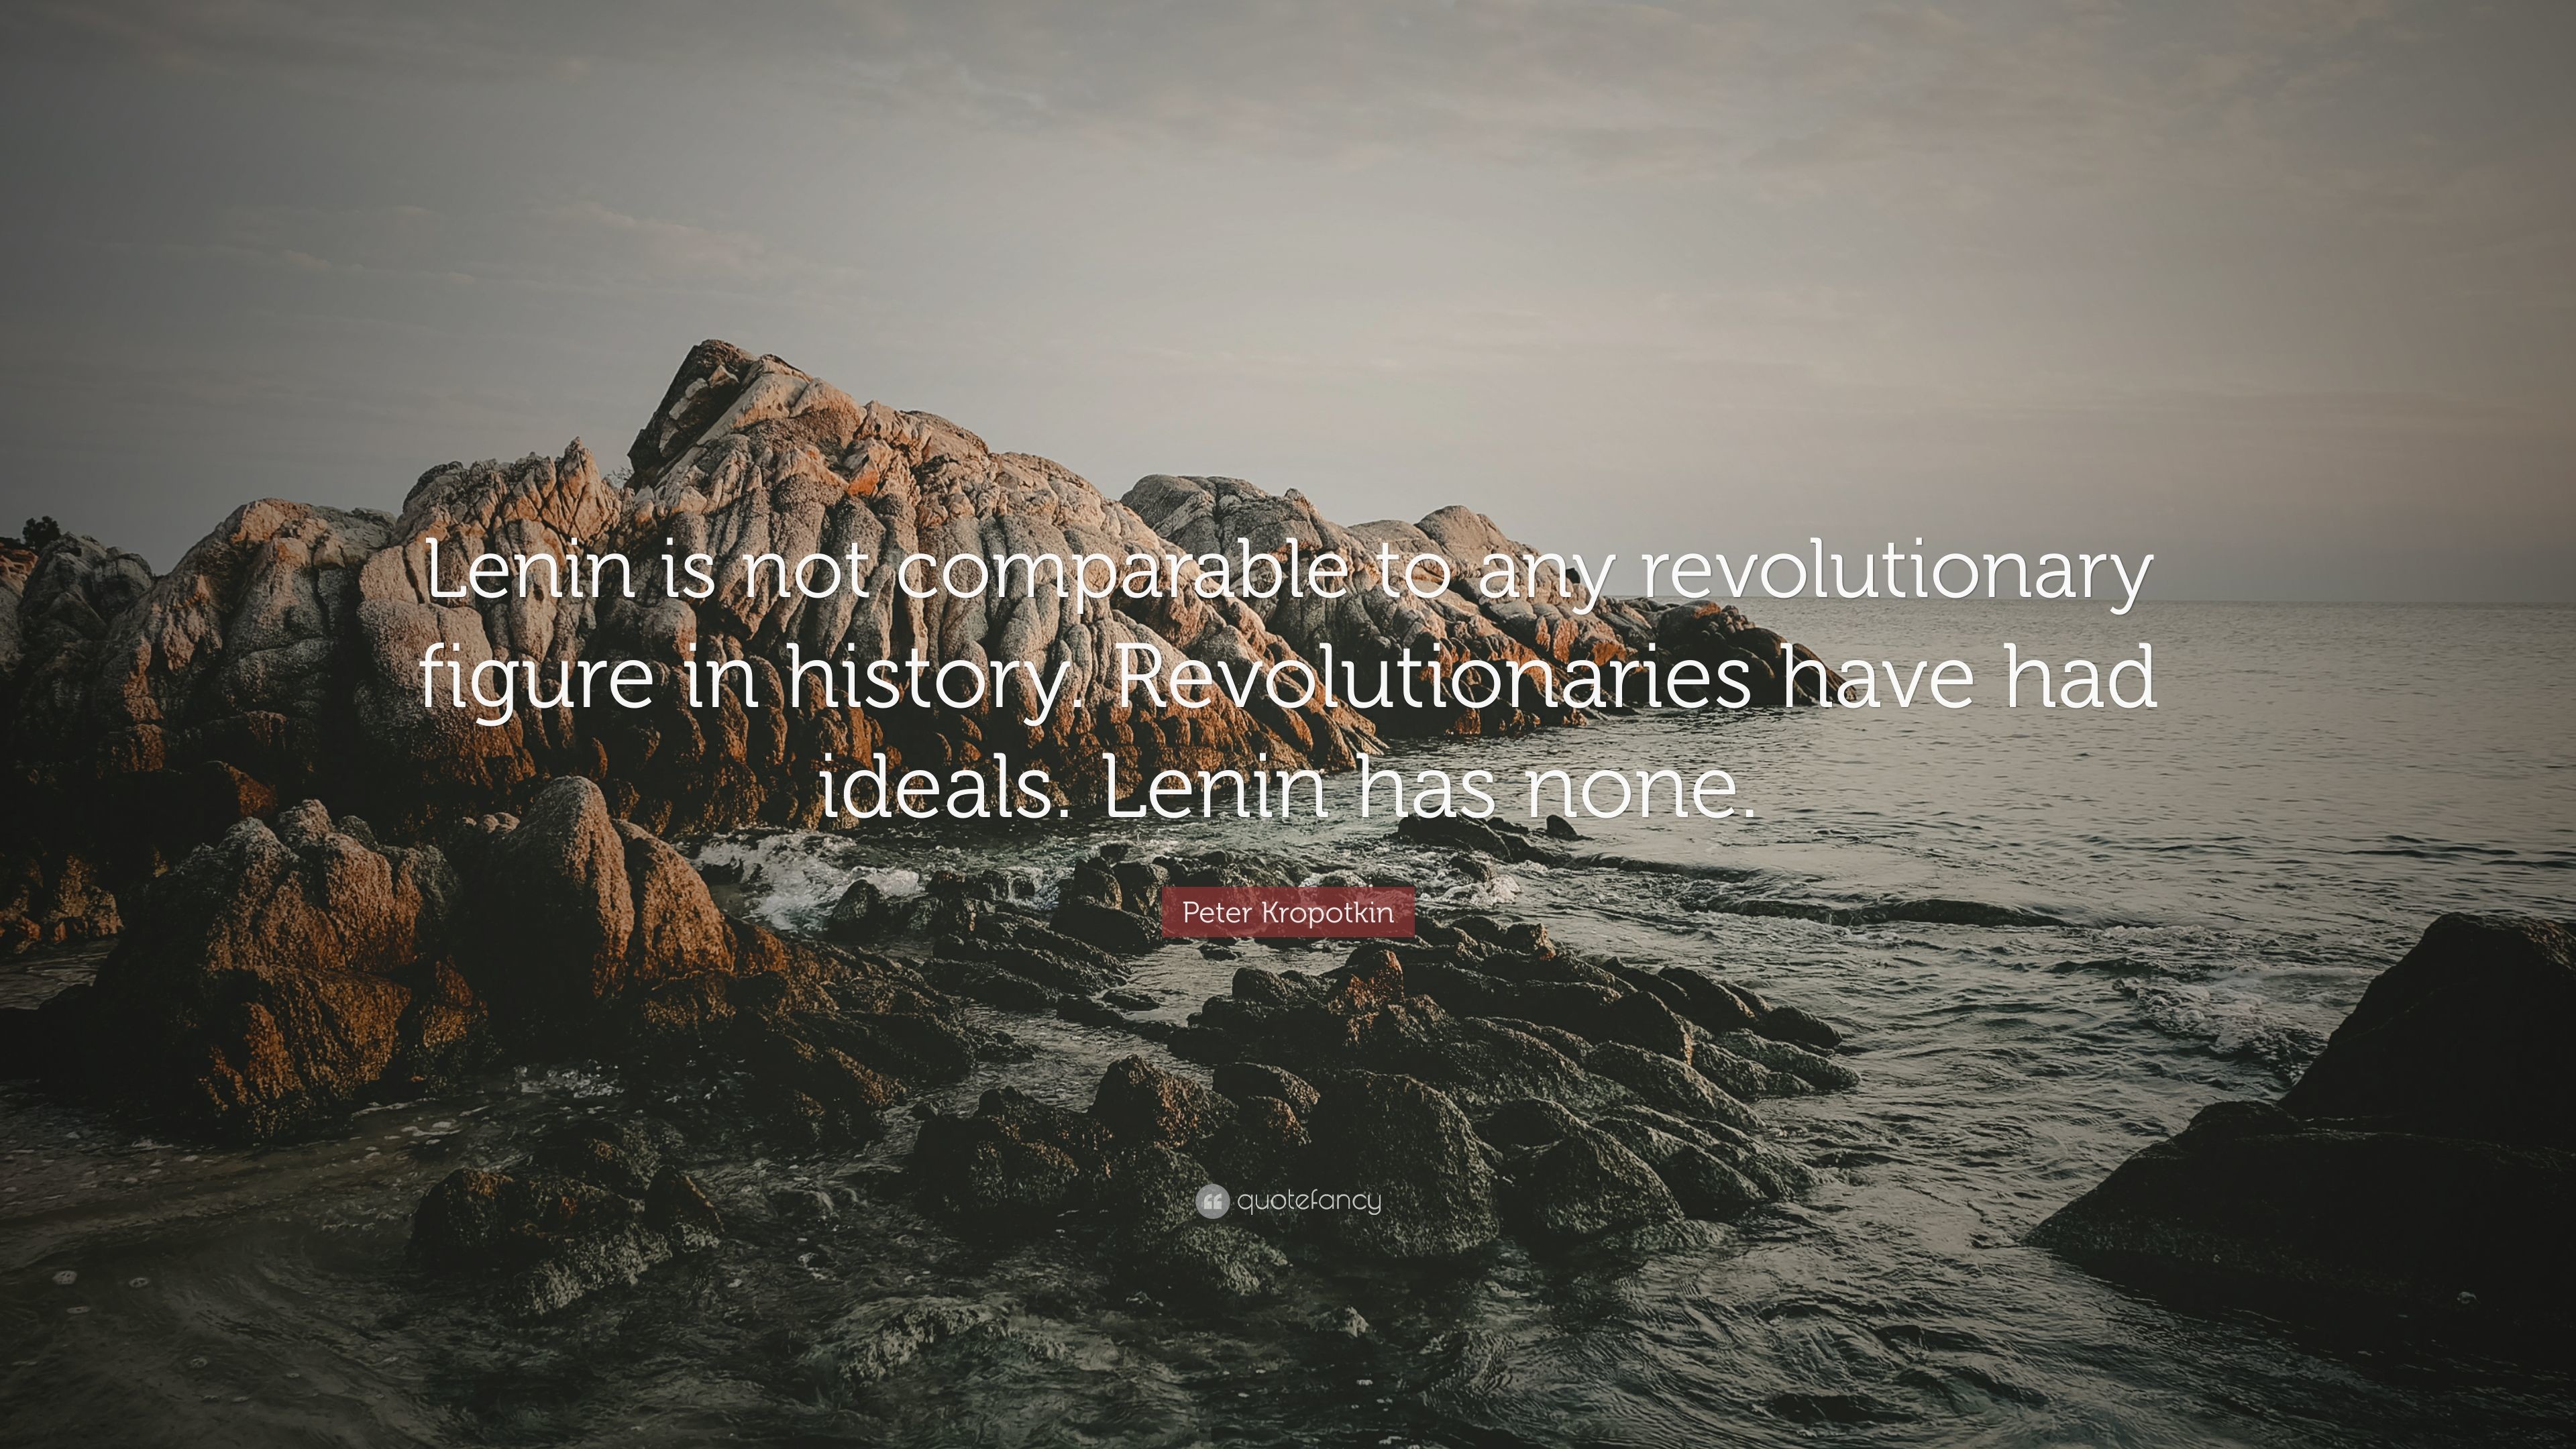 3840x2160 Peter Kropotkin Quote: “Lenin is not comparable to any revolutionary figure  in history.